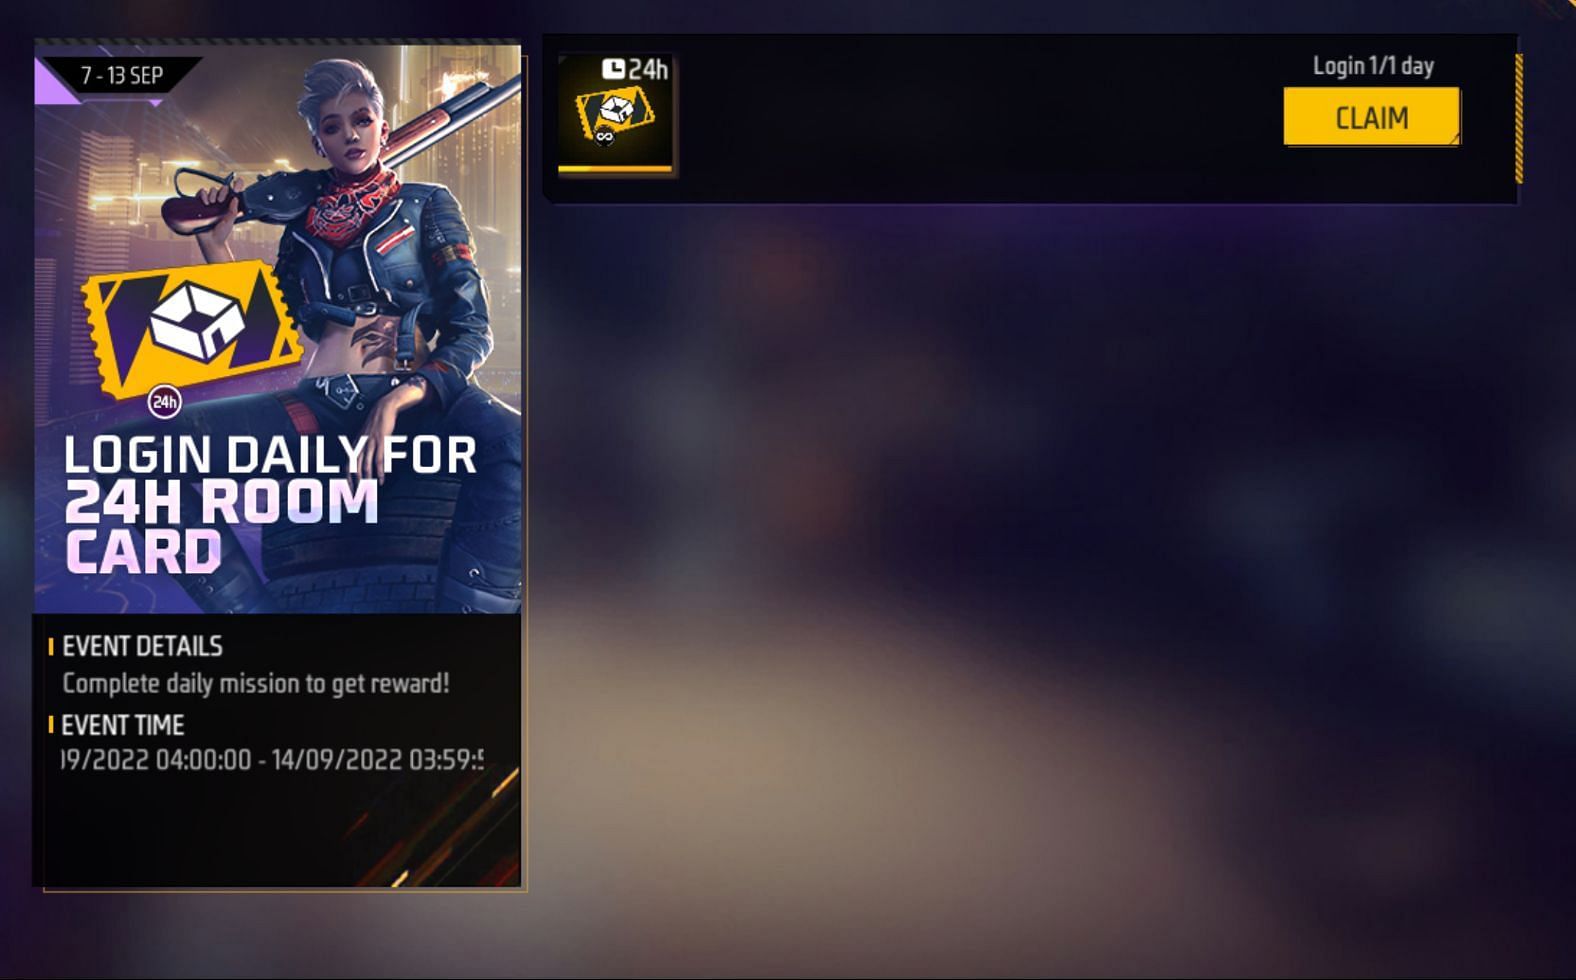 Individuals can get a free room card from the event (Image via Garena)